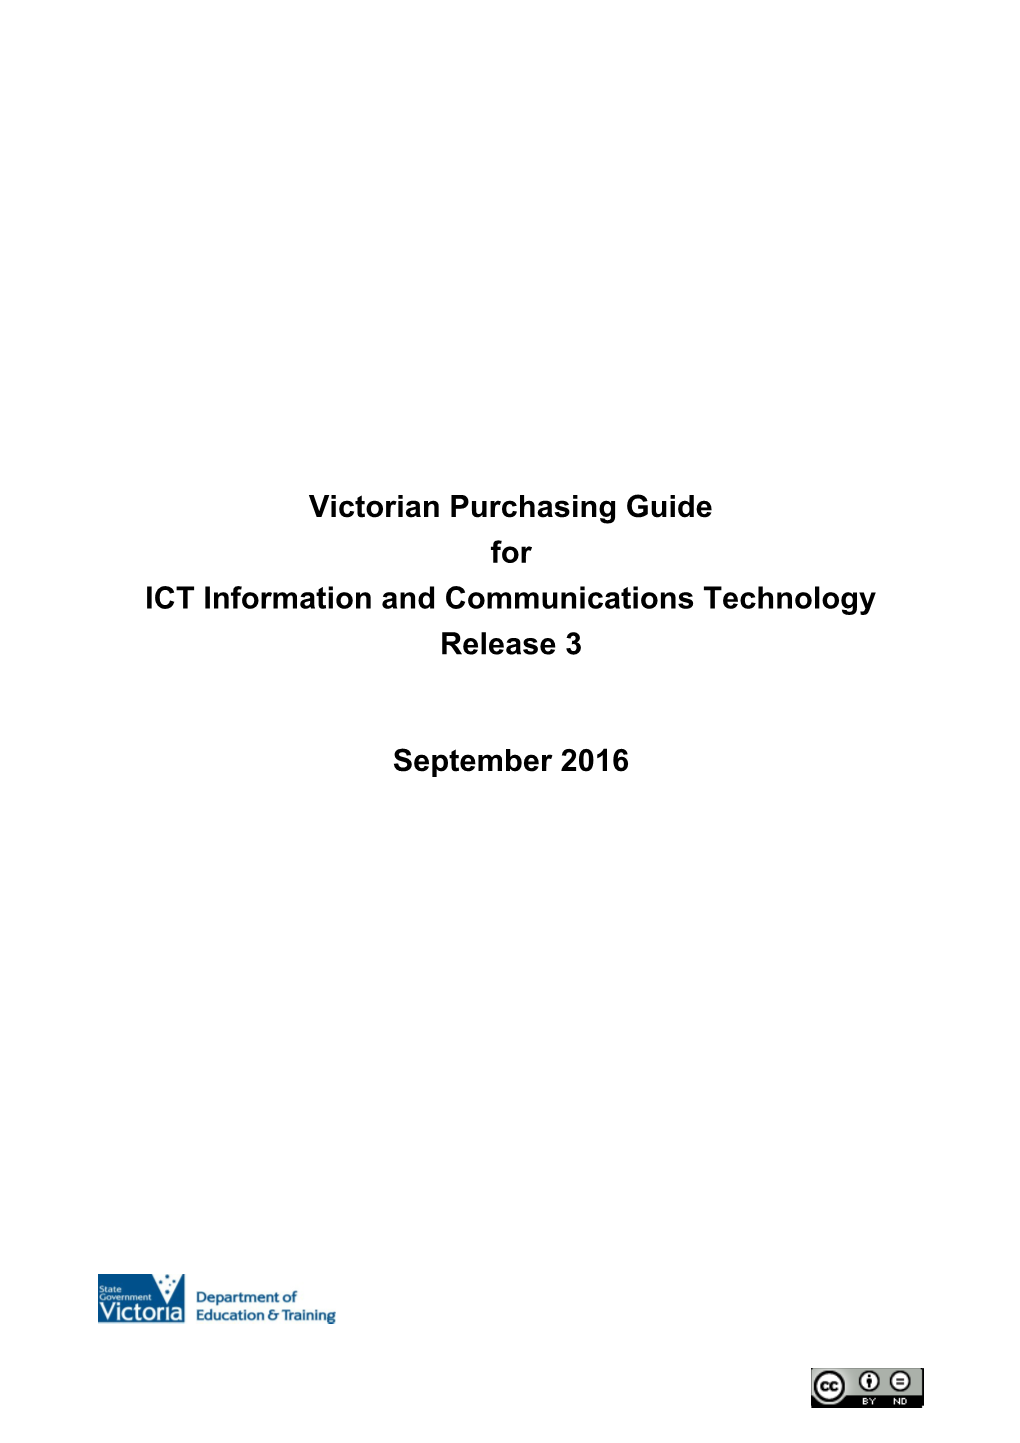 Victorian Purchasing Guide for ICT Information and Communications Technology